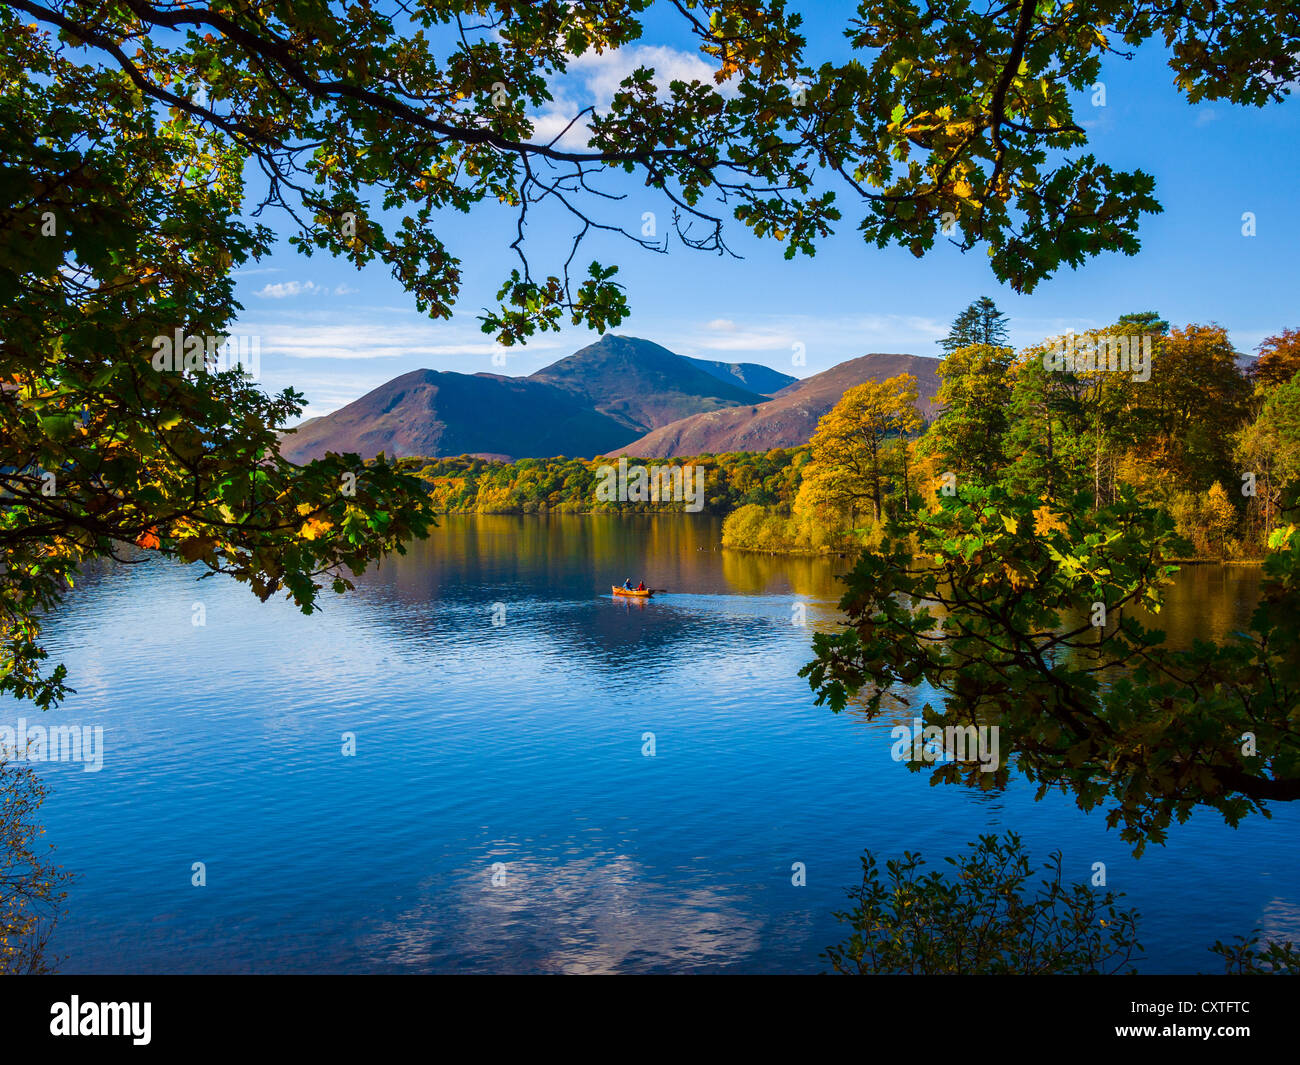 Two people out in a rowing boat on the still waters of Derwent Water in the Lake District National Park. Keswick, Cumbria, England. Stock Photo